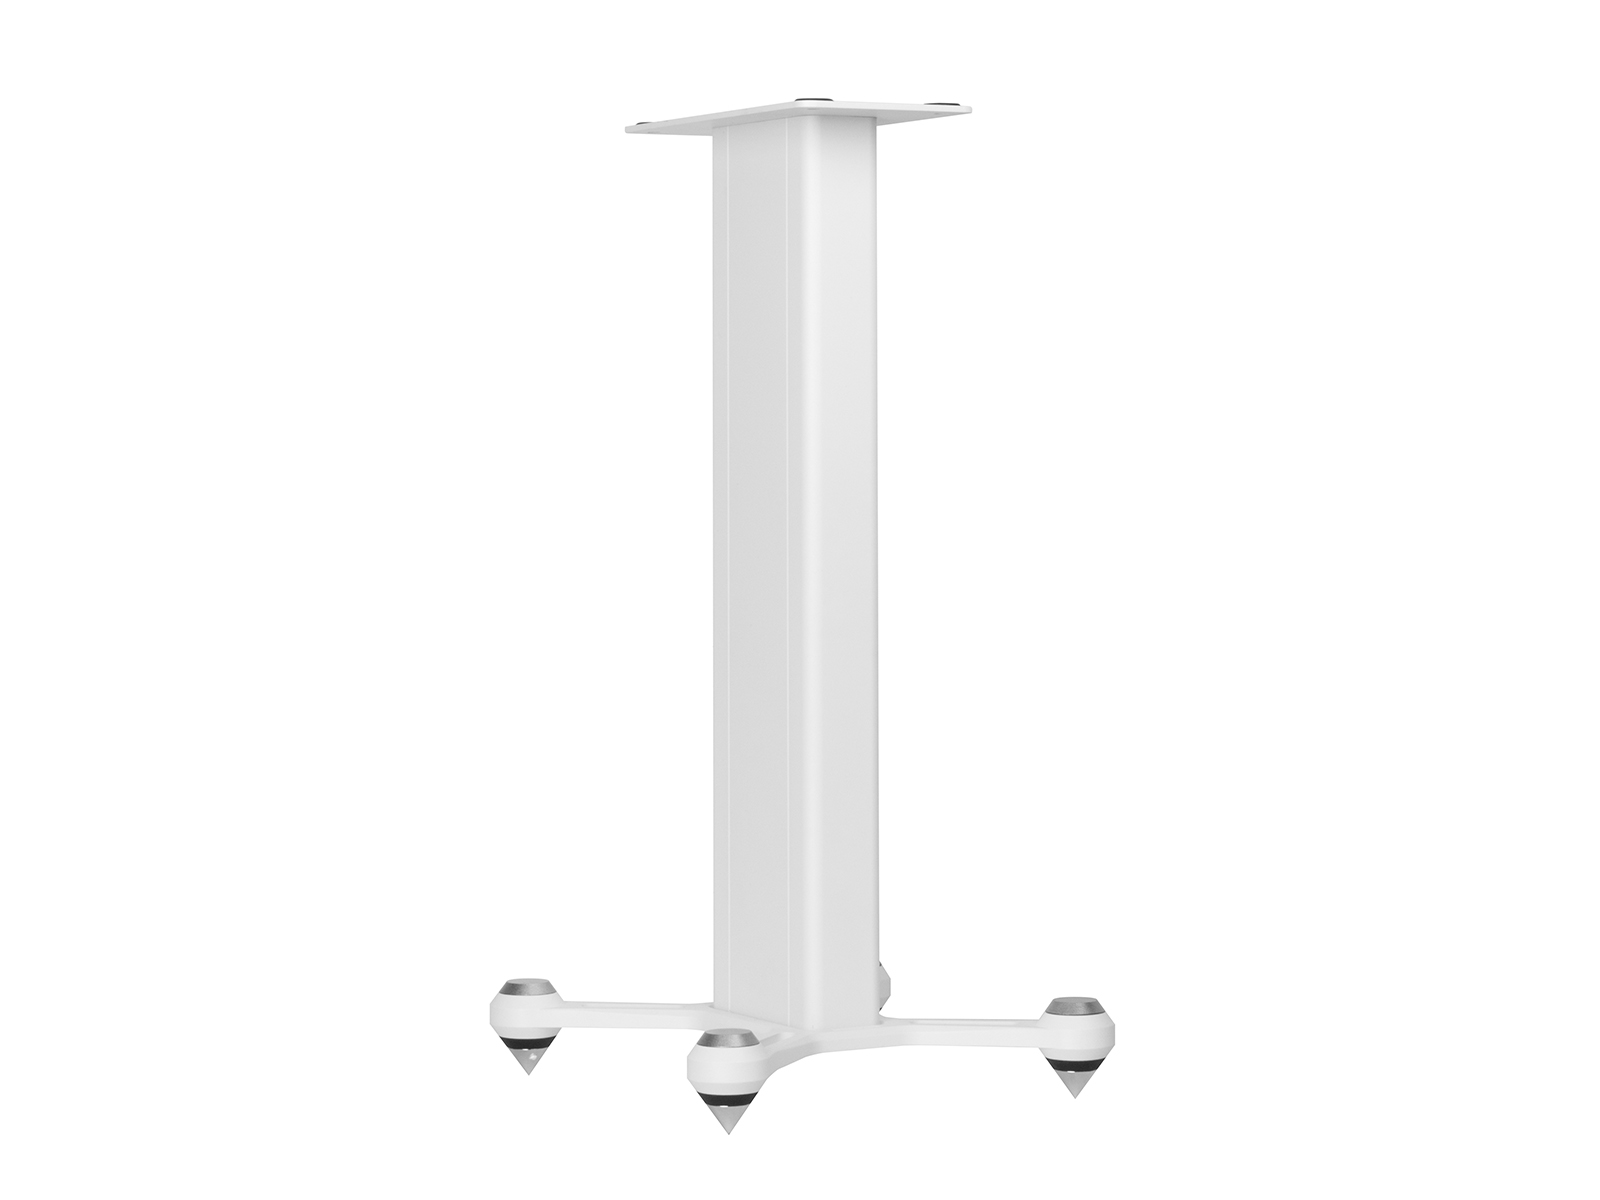 Speaker STAND, front view in a white finish.